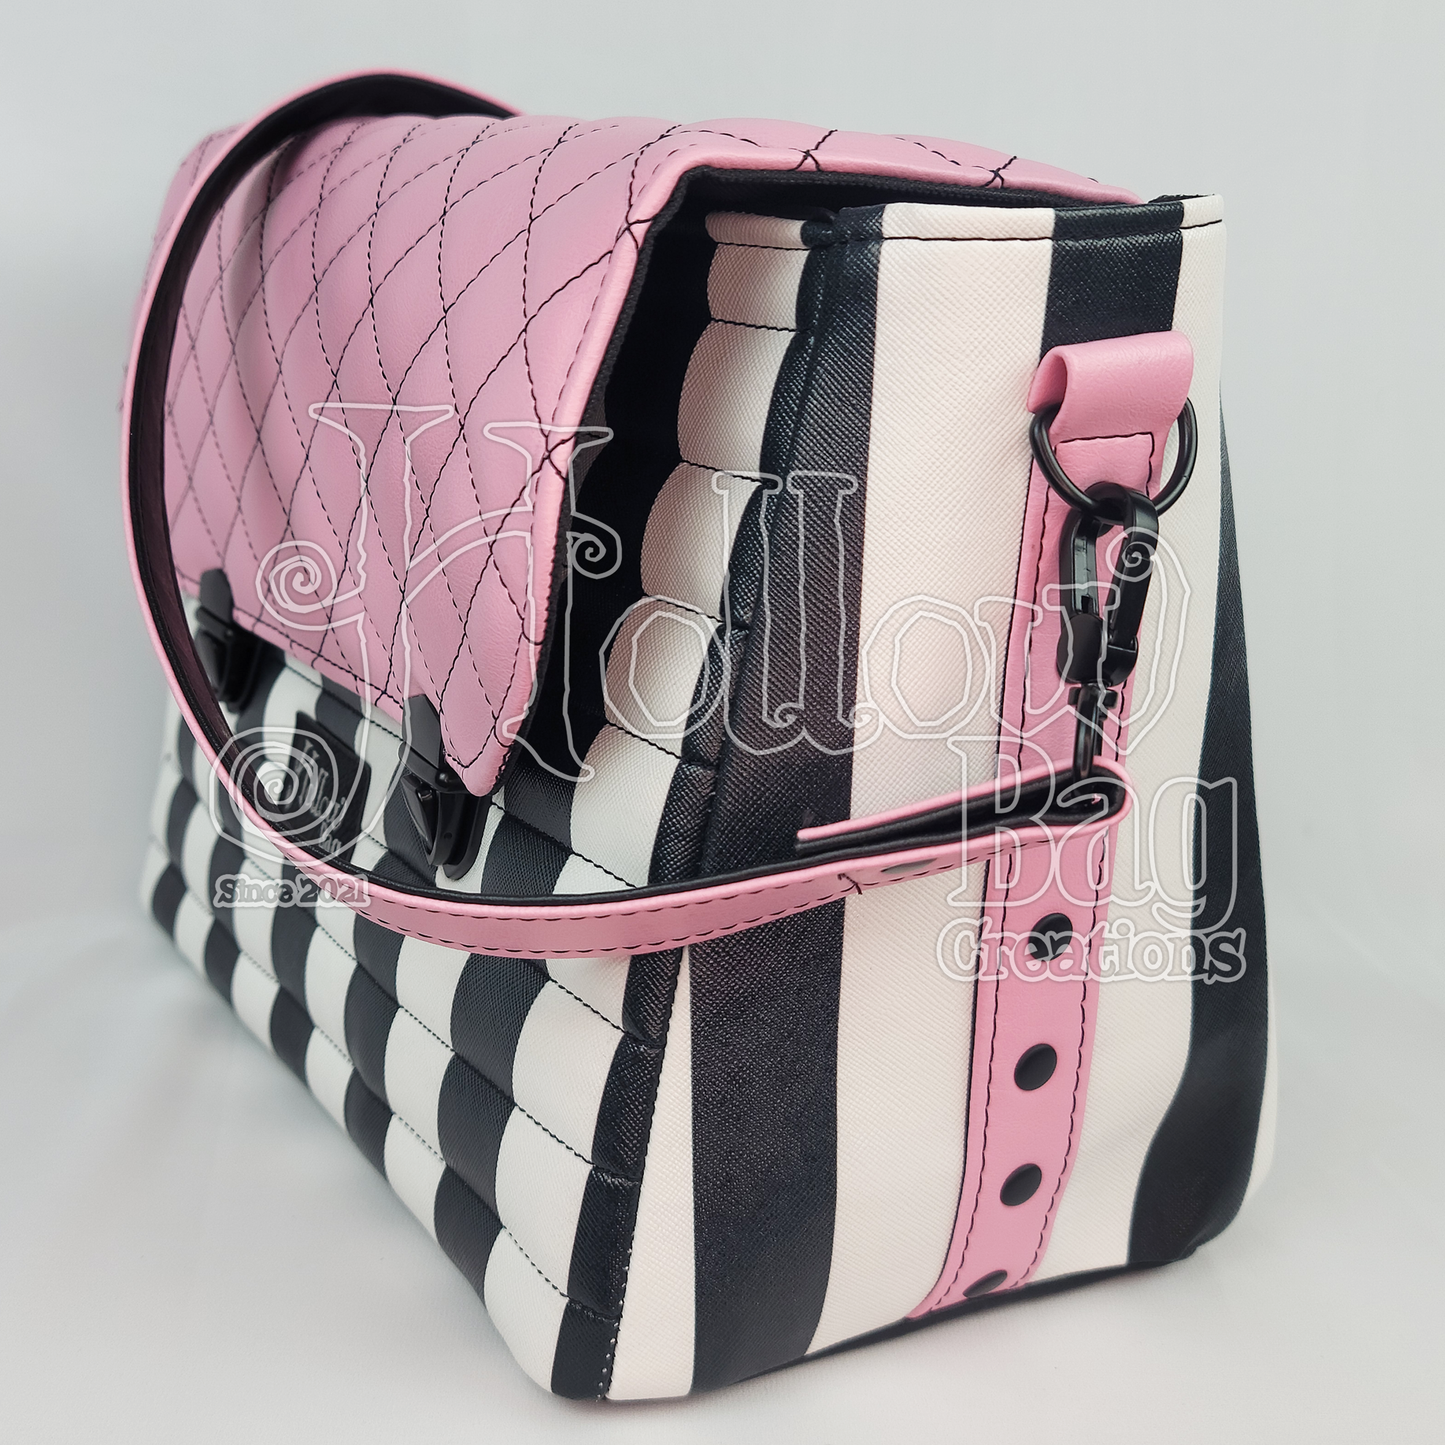 The Narcissist - Pink, but striped!